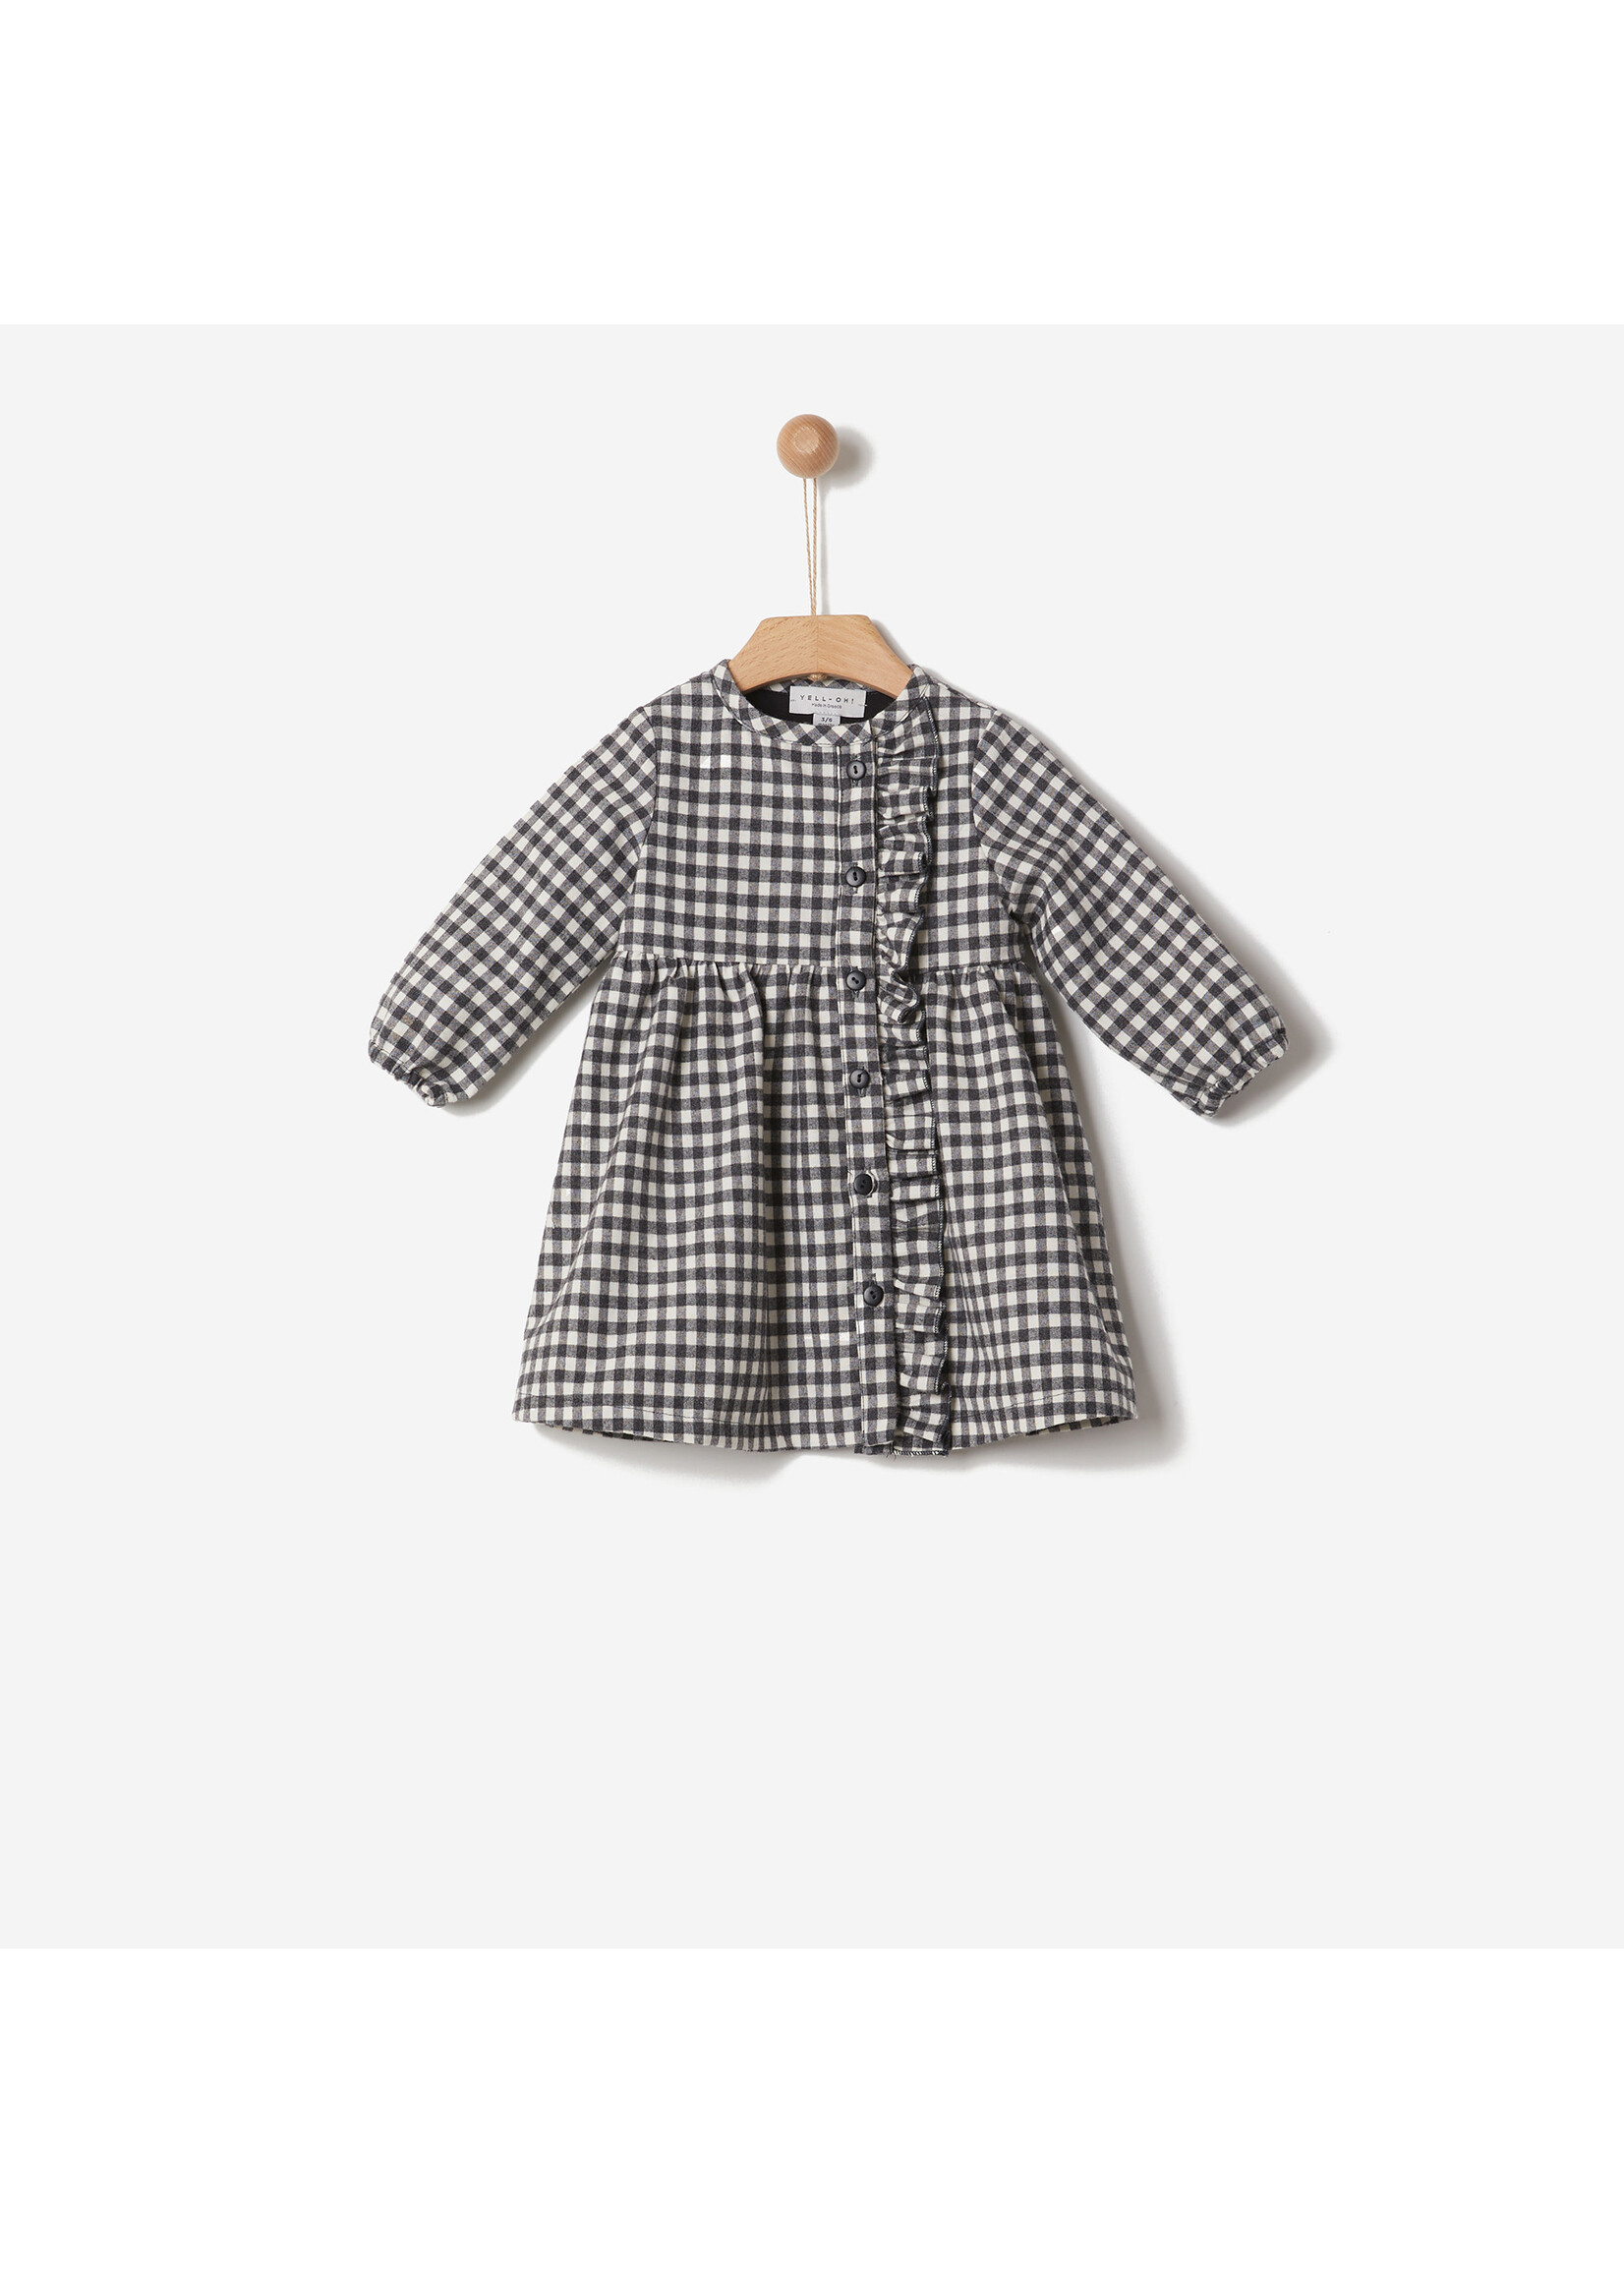 YELL OH! YELL OH! - COTTON GINGHAM BUTTON DRESS BLACK & WHITE